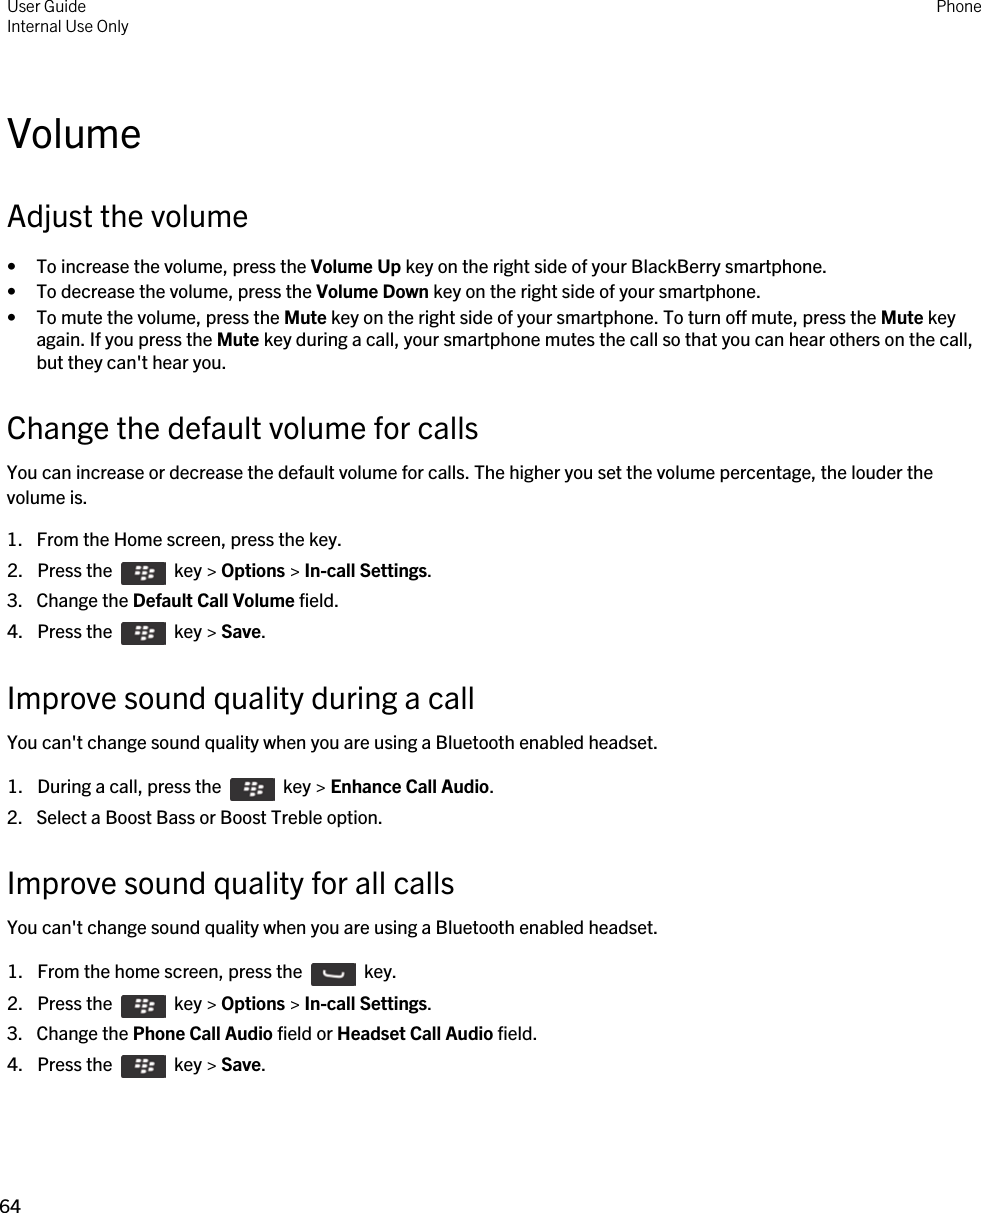 VolumeAdjust the volume• To increase the volume, press the Volume Up key on the right side of your BlackBerry smartphone.• To decrease the volume, press the Volume Down key on the right side of your smartphone.• To mute the volume, press the Mute key on the right side of your smartphone. To turn off mute, press the Mute key again. If you press the Mute key during a call, your smartphone mutes the call so that you can hear others on the call, but they can&apos;t hear you.Change the default volume for callsYou can increase or decrease the default volume for calls. The higher you set the volume percentage, the louder the volume is.1. From the Home screen, press the key.2.  Press the    key &gt; Options &gt; In-call Settings. 3. Change the Default Call Volume field.4.  Press the    key &gt; Save. Improve sound quality during a callYou can&apos;t change sound quality when you are using a Bluetooth enabled headset.1.  During a call, press the    key &gt; Enhance Call Audio.2. Select a Boost Bass or Boost Treble option.Improve sound quality for all callsYou can&apos;t change sound quality when you are using a Bluetooth enabled headset.1.  From the home screen, press the    key. 2.  Press the    key &gt; Options &gt; In-call Settings.3. Change the Phone Call Audio field or Headset Call Audio field.4.  Press the    key &gt; Save. User GuideInternal Use Only Phone64 